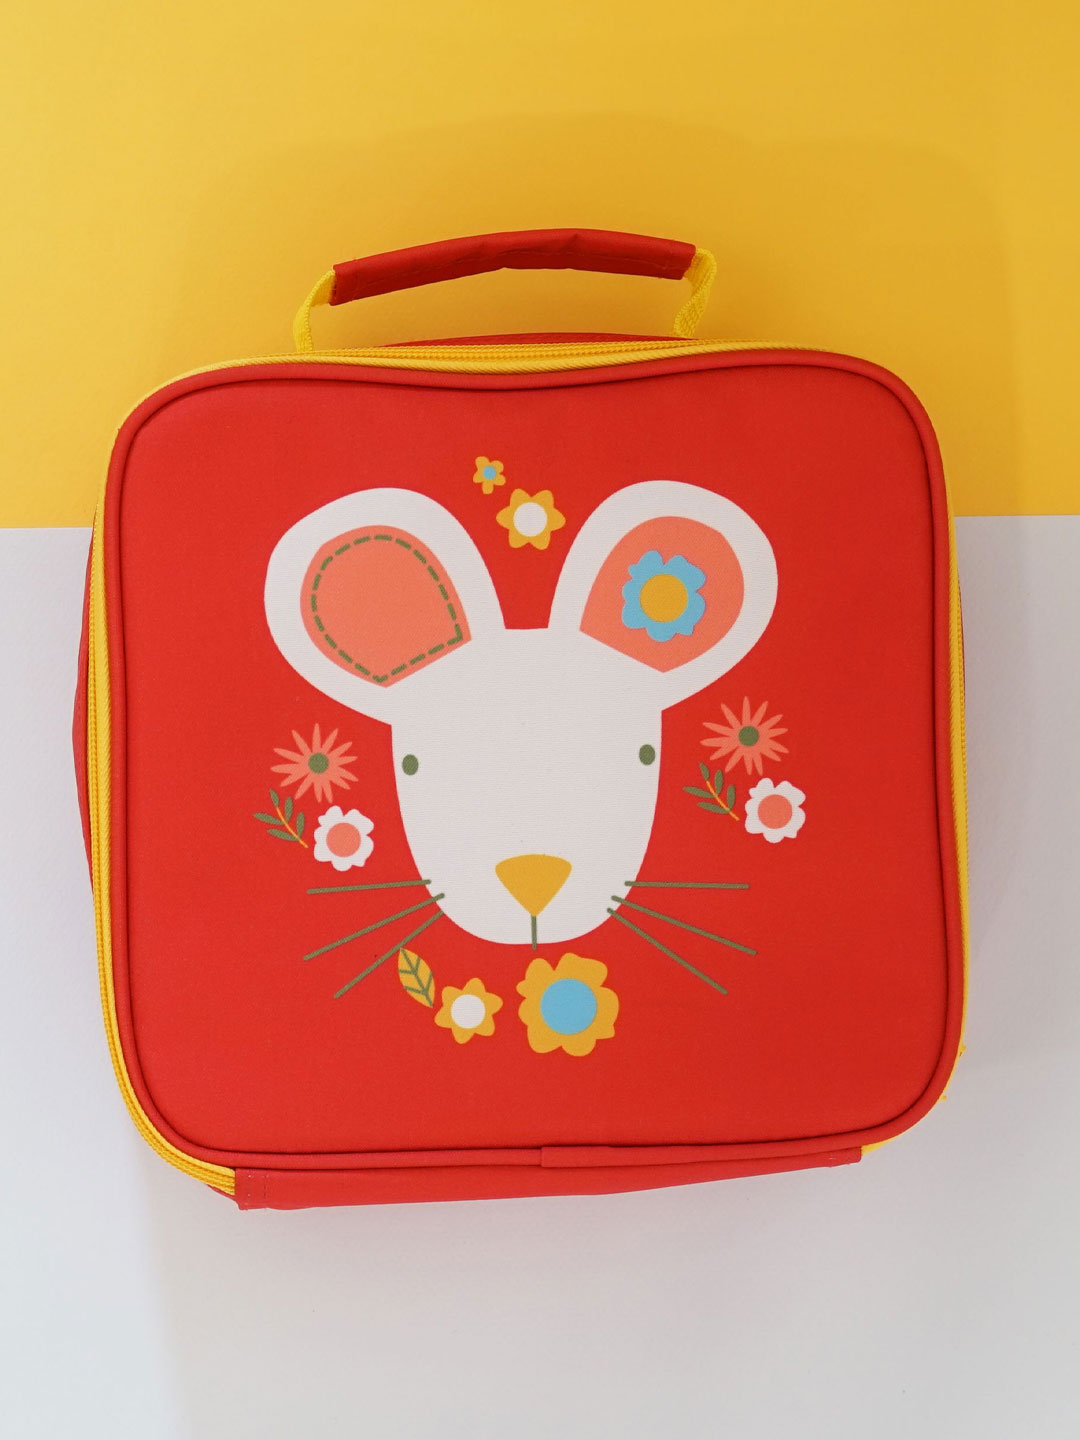 Blade & Rose Maura the Mouse Lunchbox